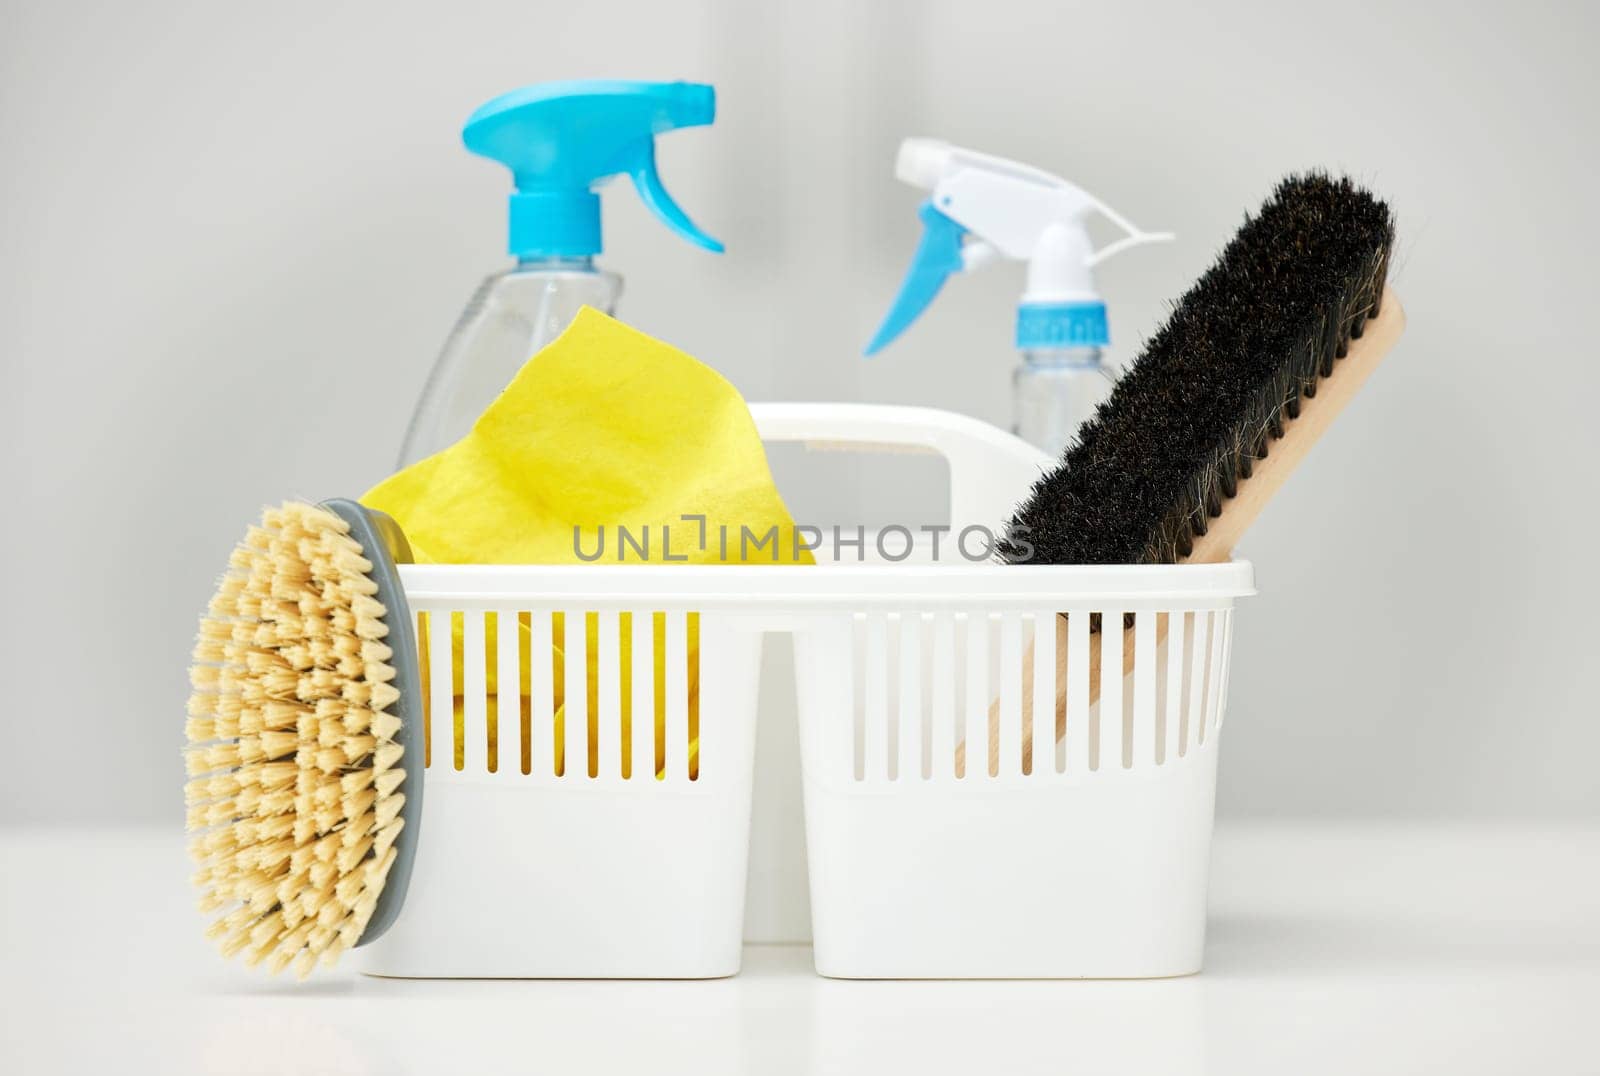 Table, brush or basket with supplies, spray bottle or chemical for bacteria, wellness or dirty mess in home. Grey background, cleaning service or ready for washing with product, liquid soap or gloves.